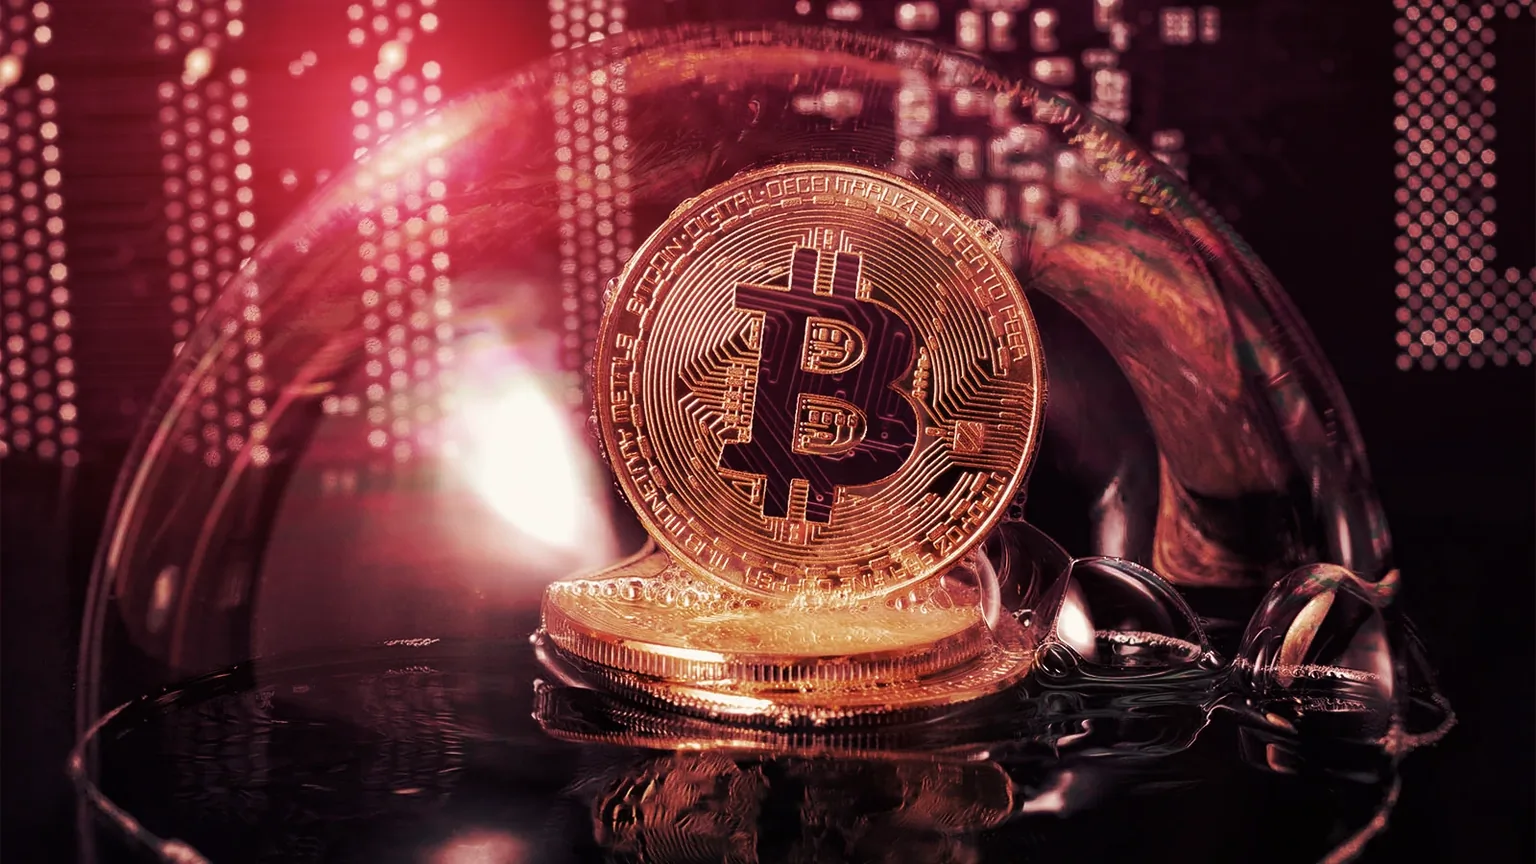 Bitcoin is bubbling. IMAGE: Shutterstock